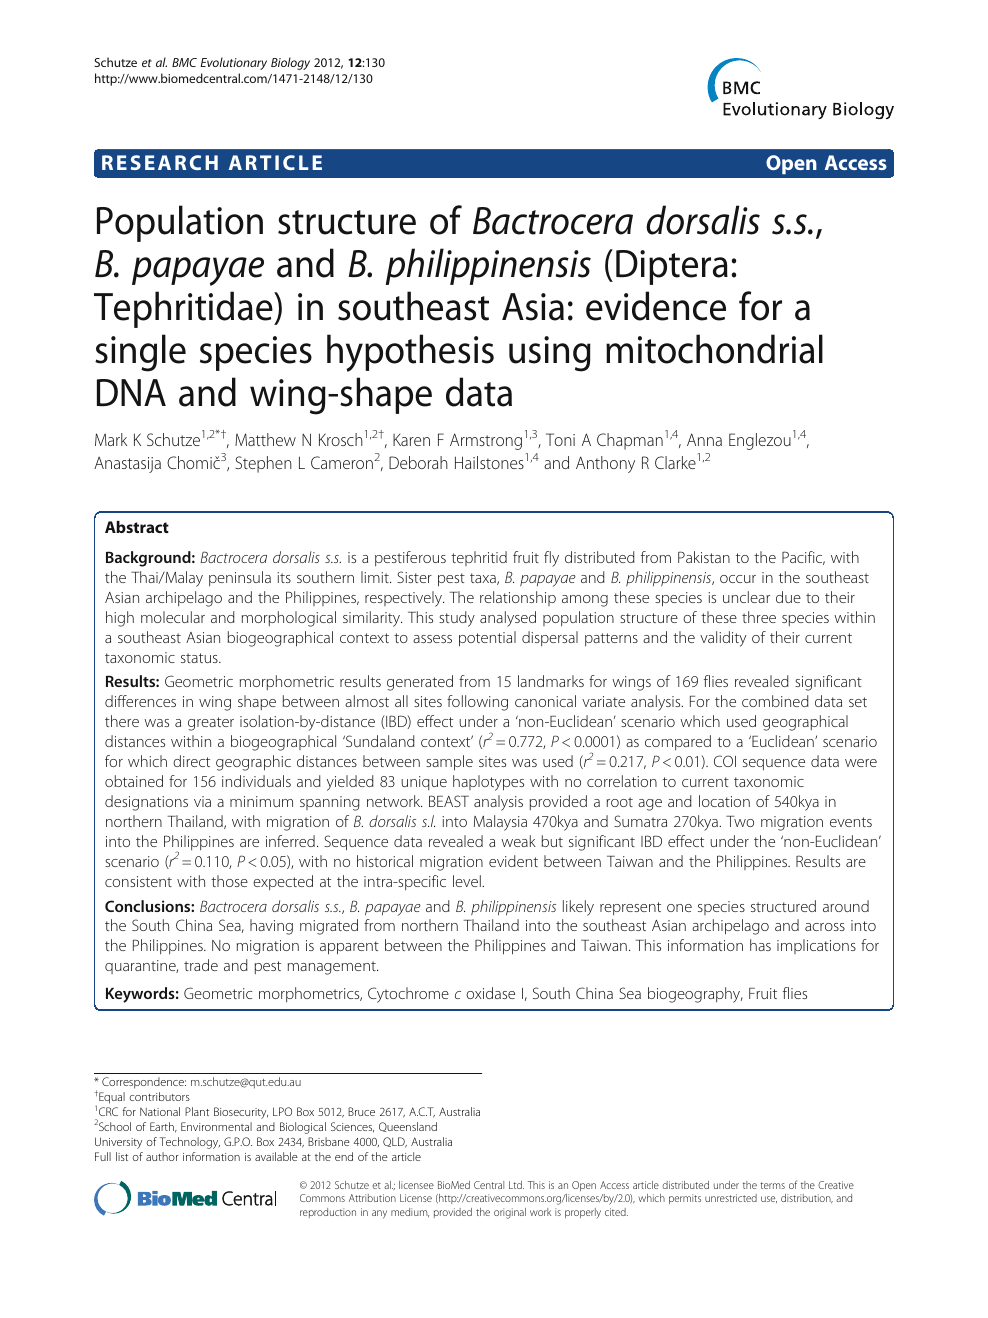 Population Structure Of Bactrocera Dorsalis S S B Papayae And B Philippinensis Diptera Tephritidae In Southeast Asia Evidence For A Single Species Hypothesis Using Mitochondrial Dna And Wing Shape Data Topic Of Research